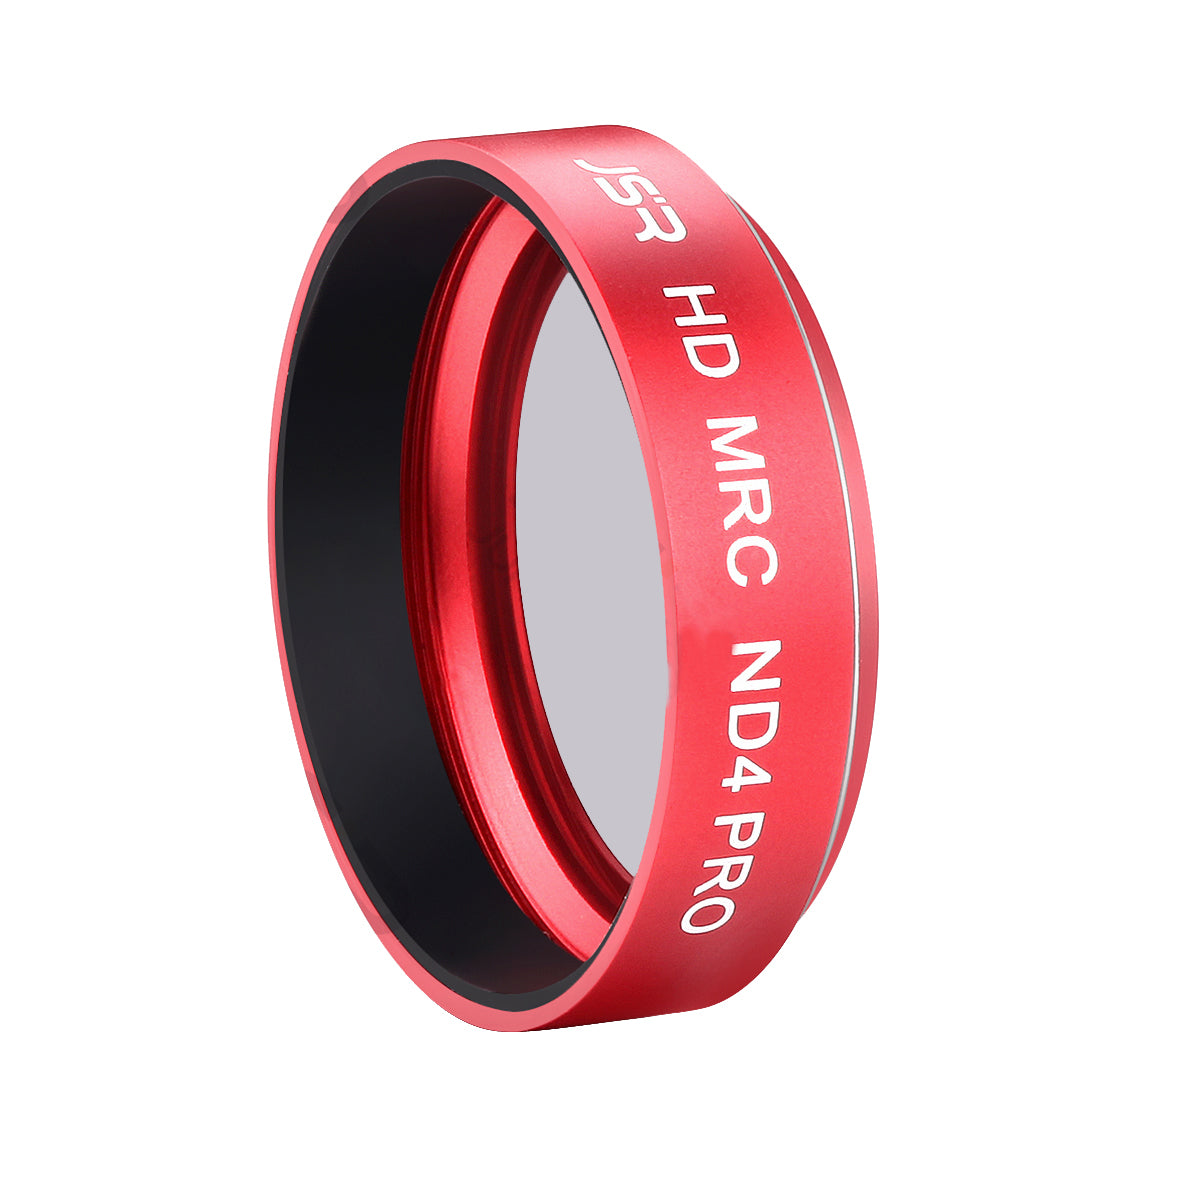 AT-M25 4-in-1 ND4 + ND8 + CPL + UV Lens Filter Kit for Xiaomi Mi Mijia Mini Action Camera